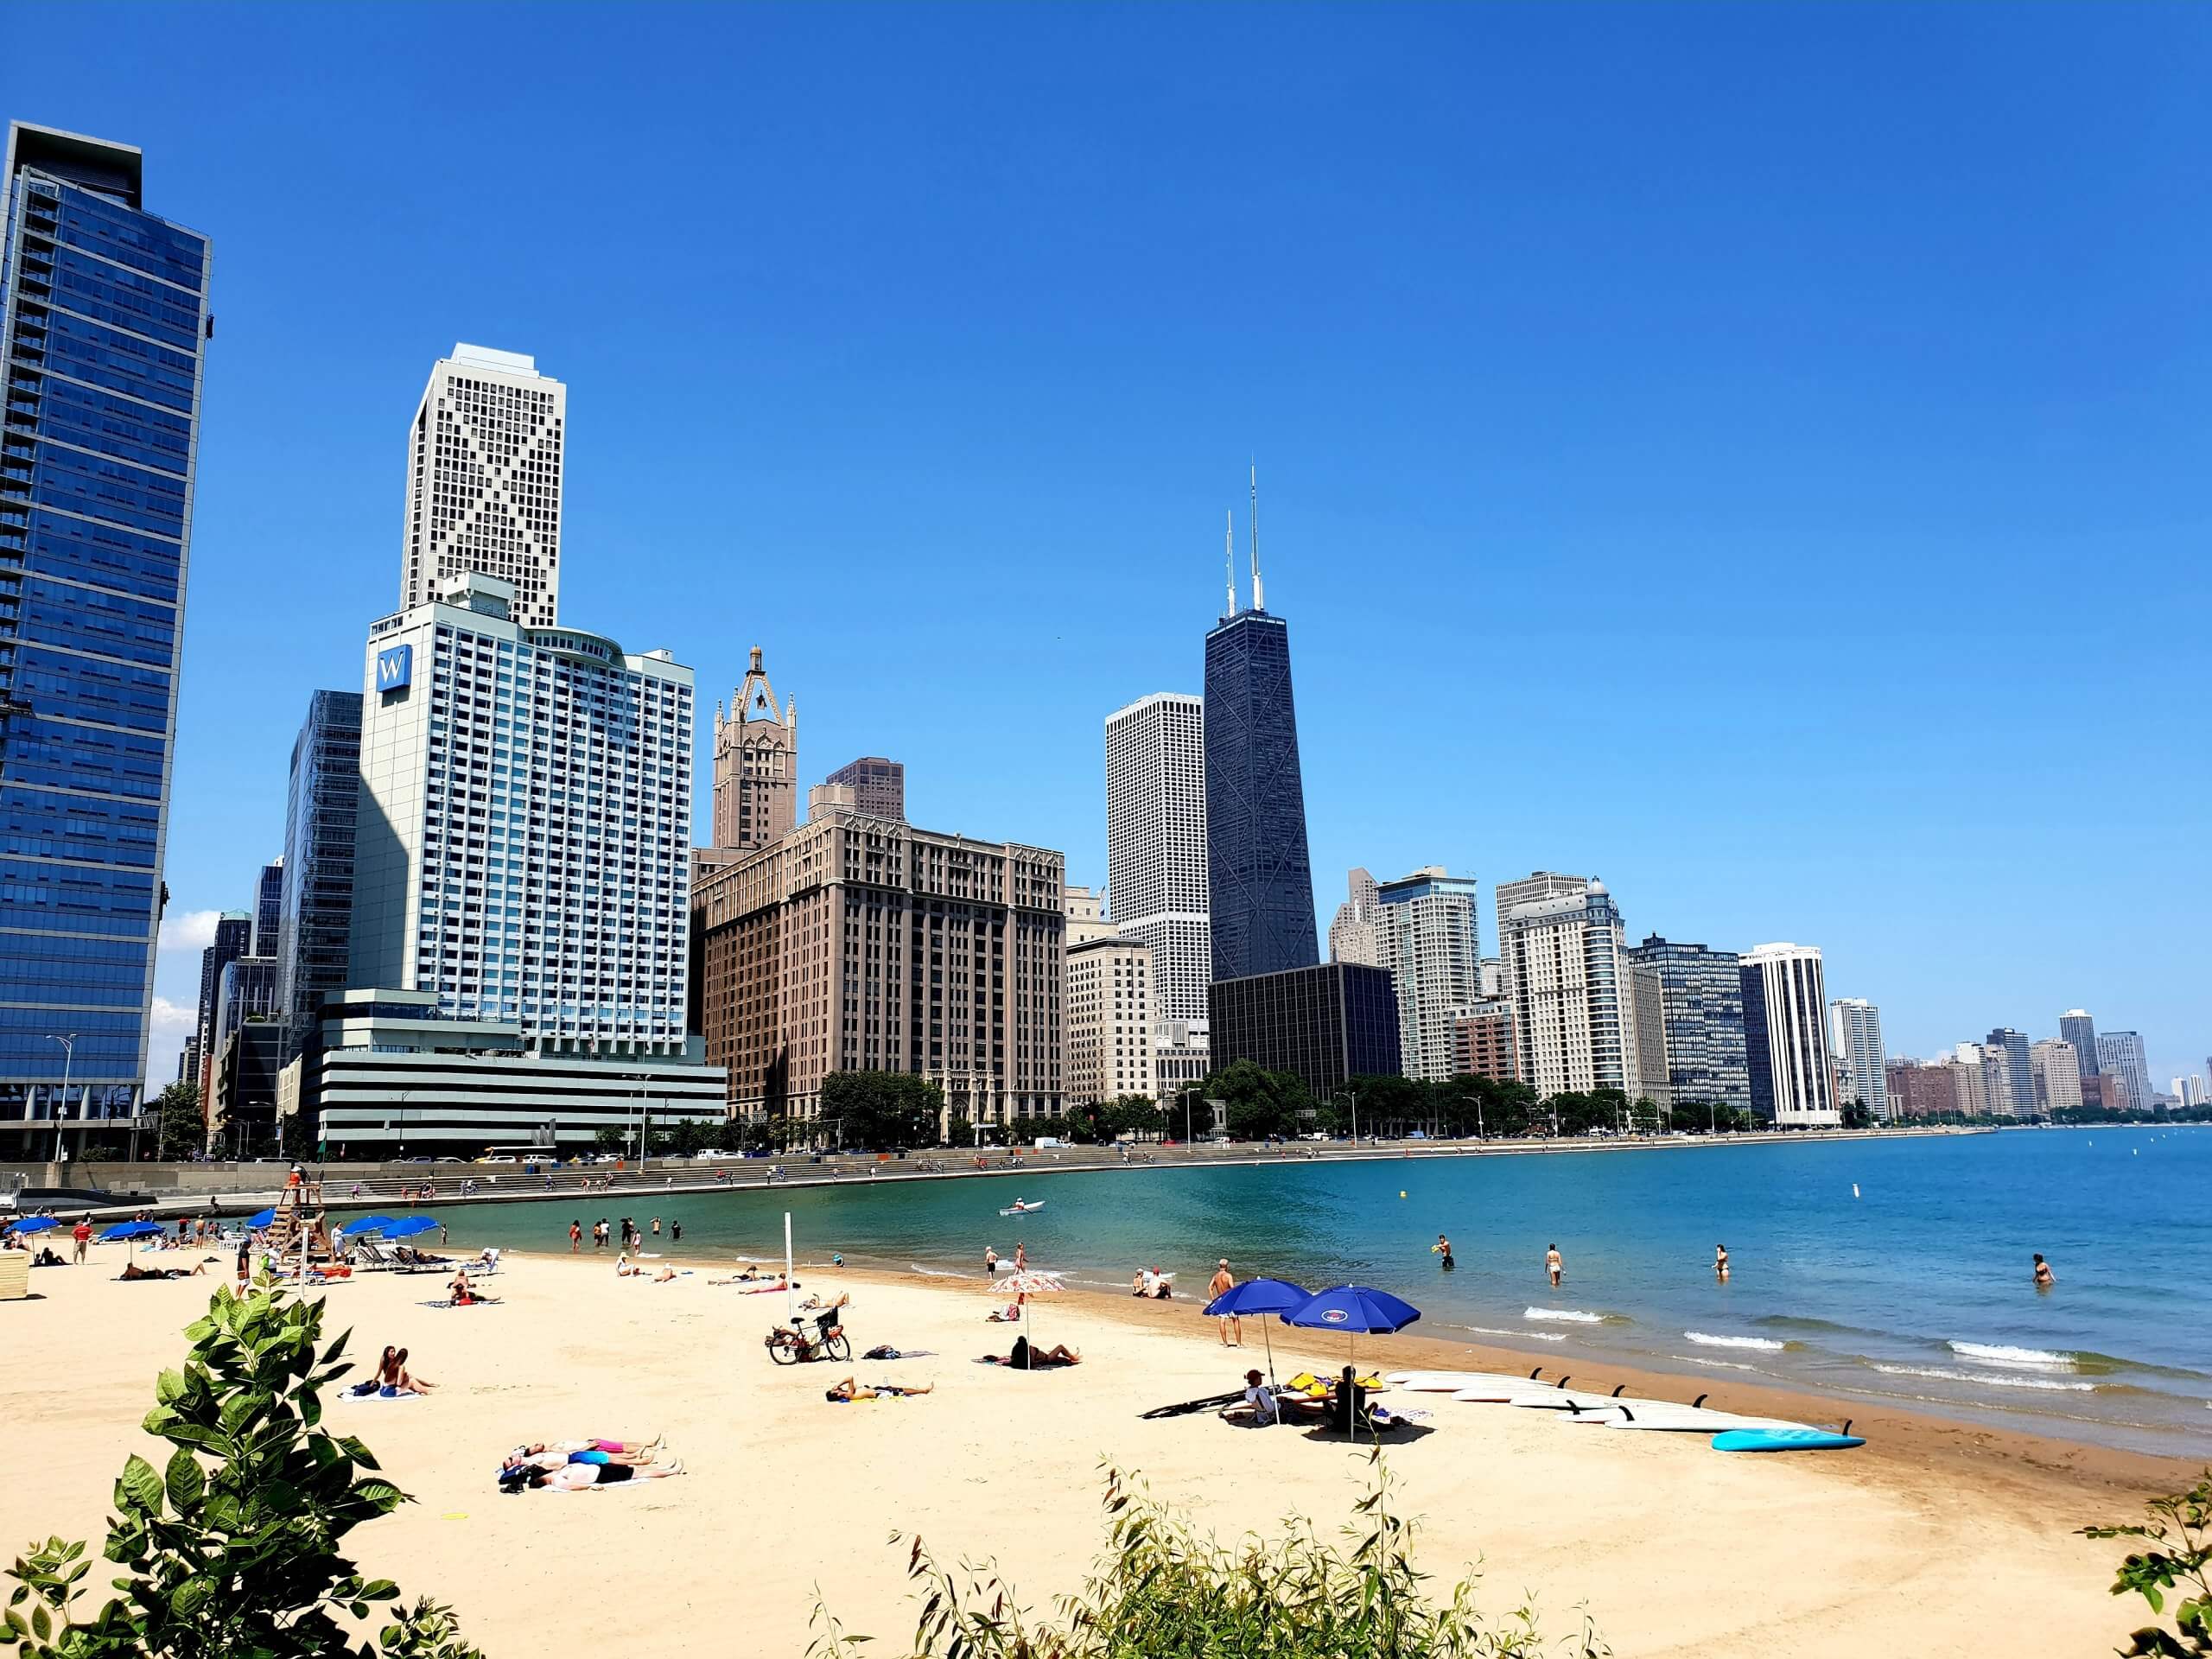 Beach with people and skyscrapers in background.